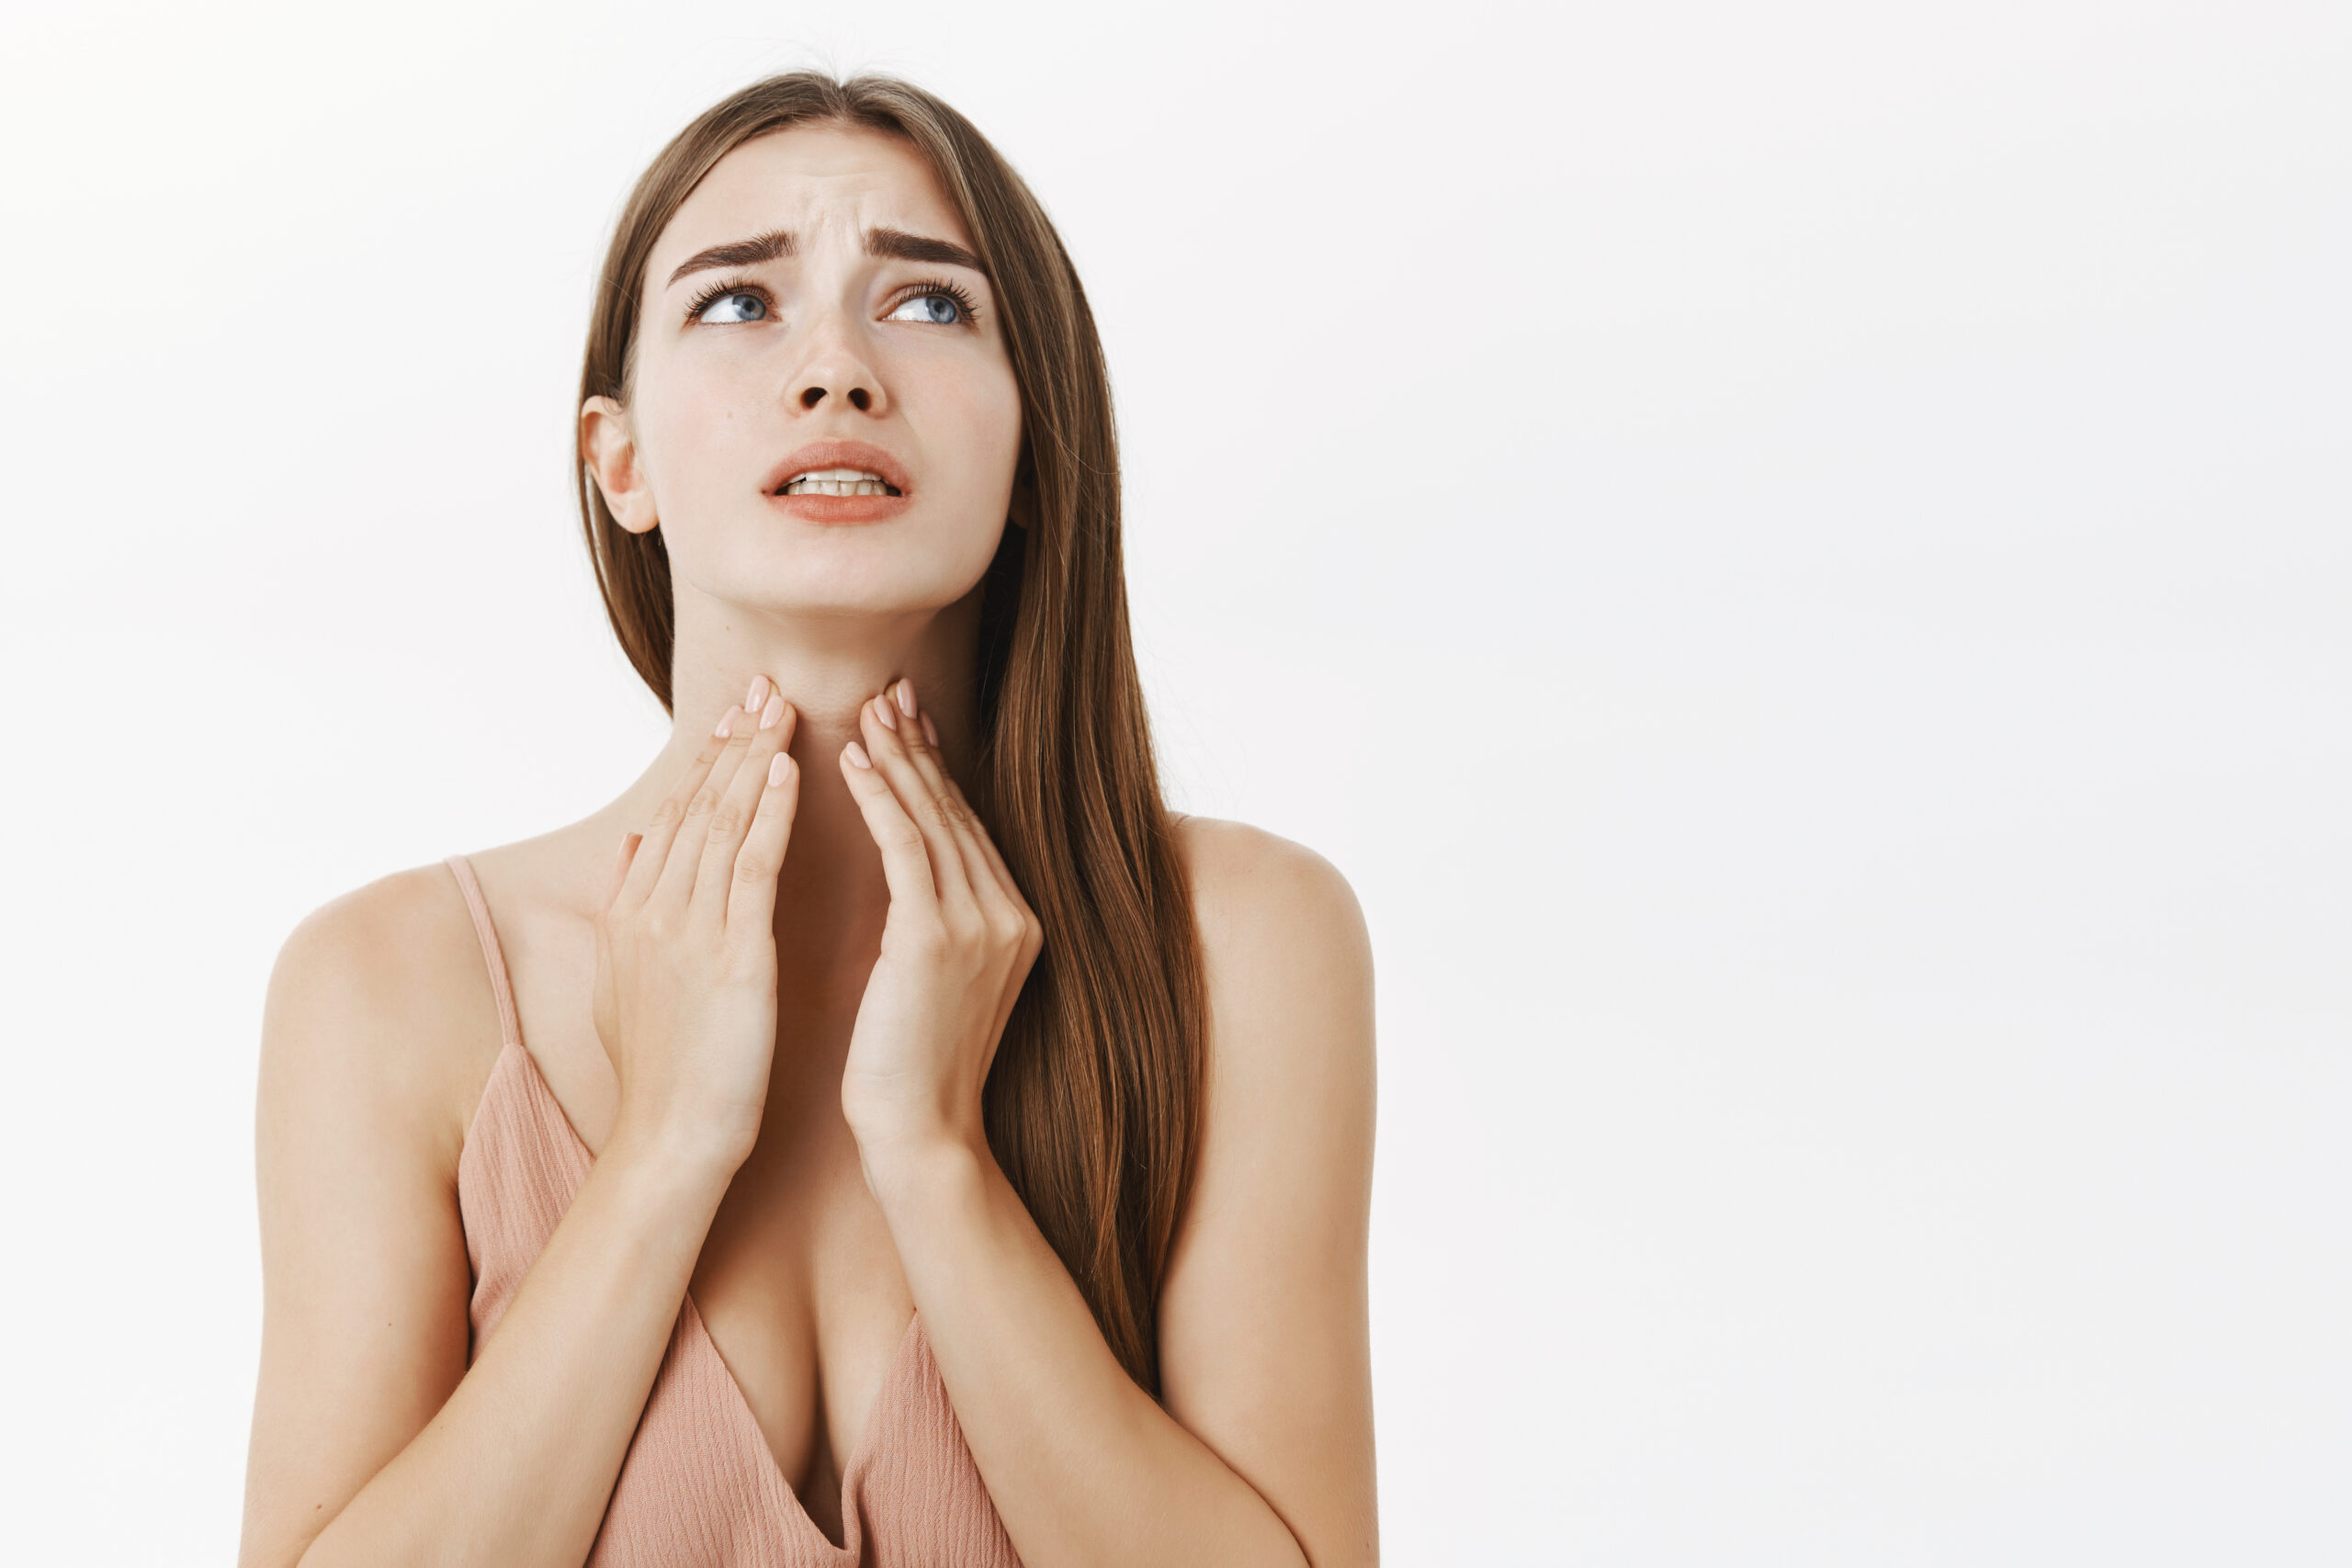 LARYNGITIS or HOARSENESS OF VOICE: CAUSES, DIAGNOSIS, TREATMENT, and HOME REMEDY